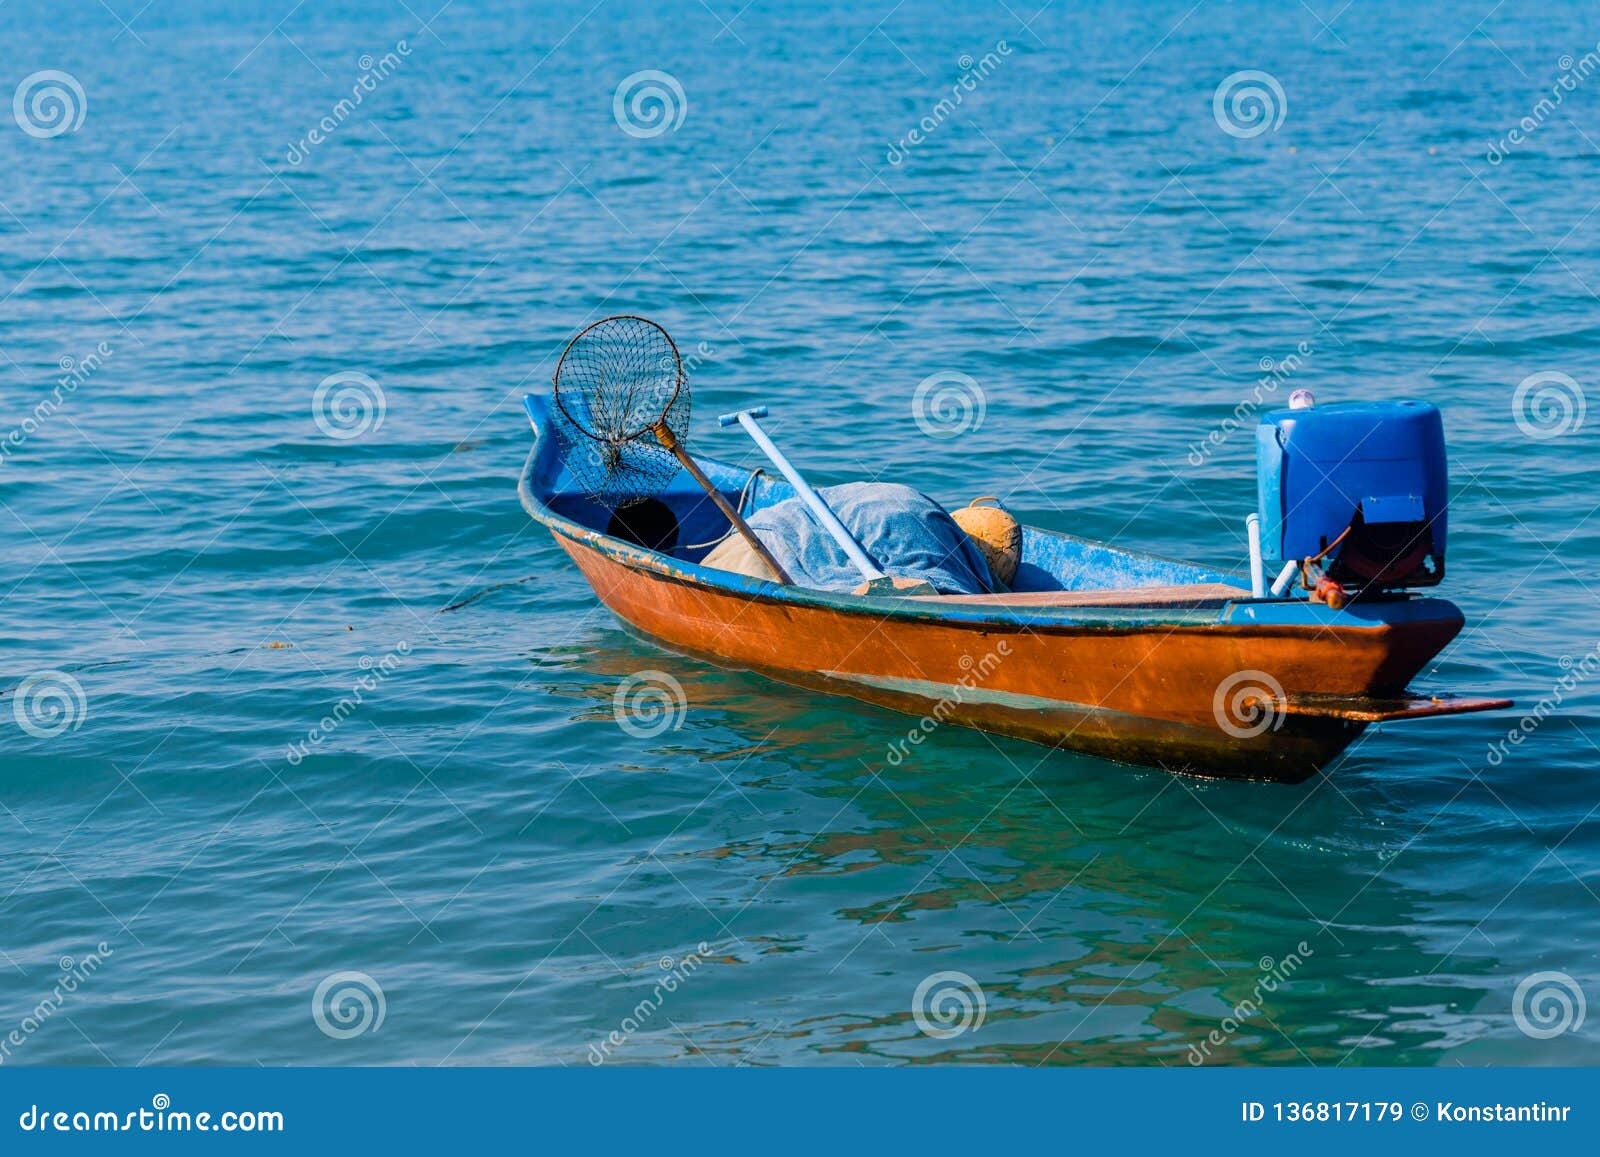 Thai Fishing Boat On The Waves Of The Azure Sea Stock ...